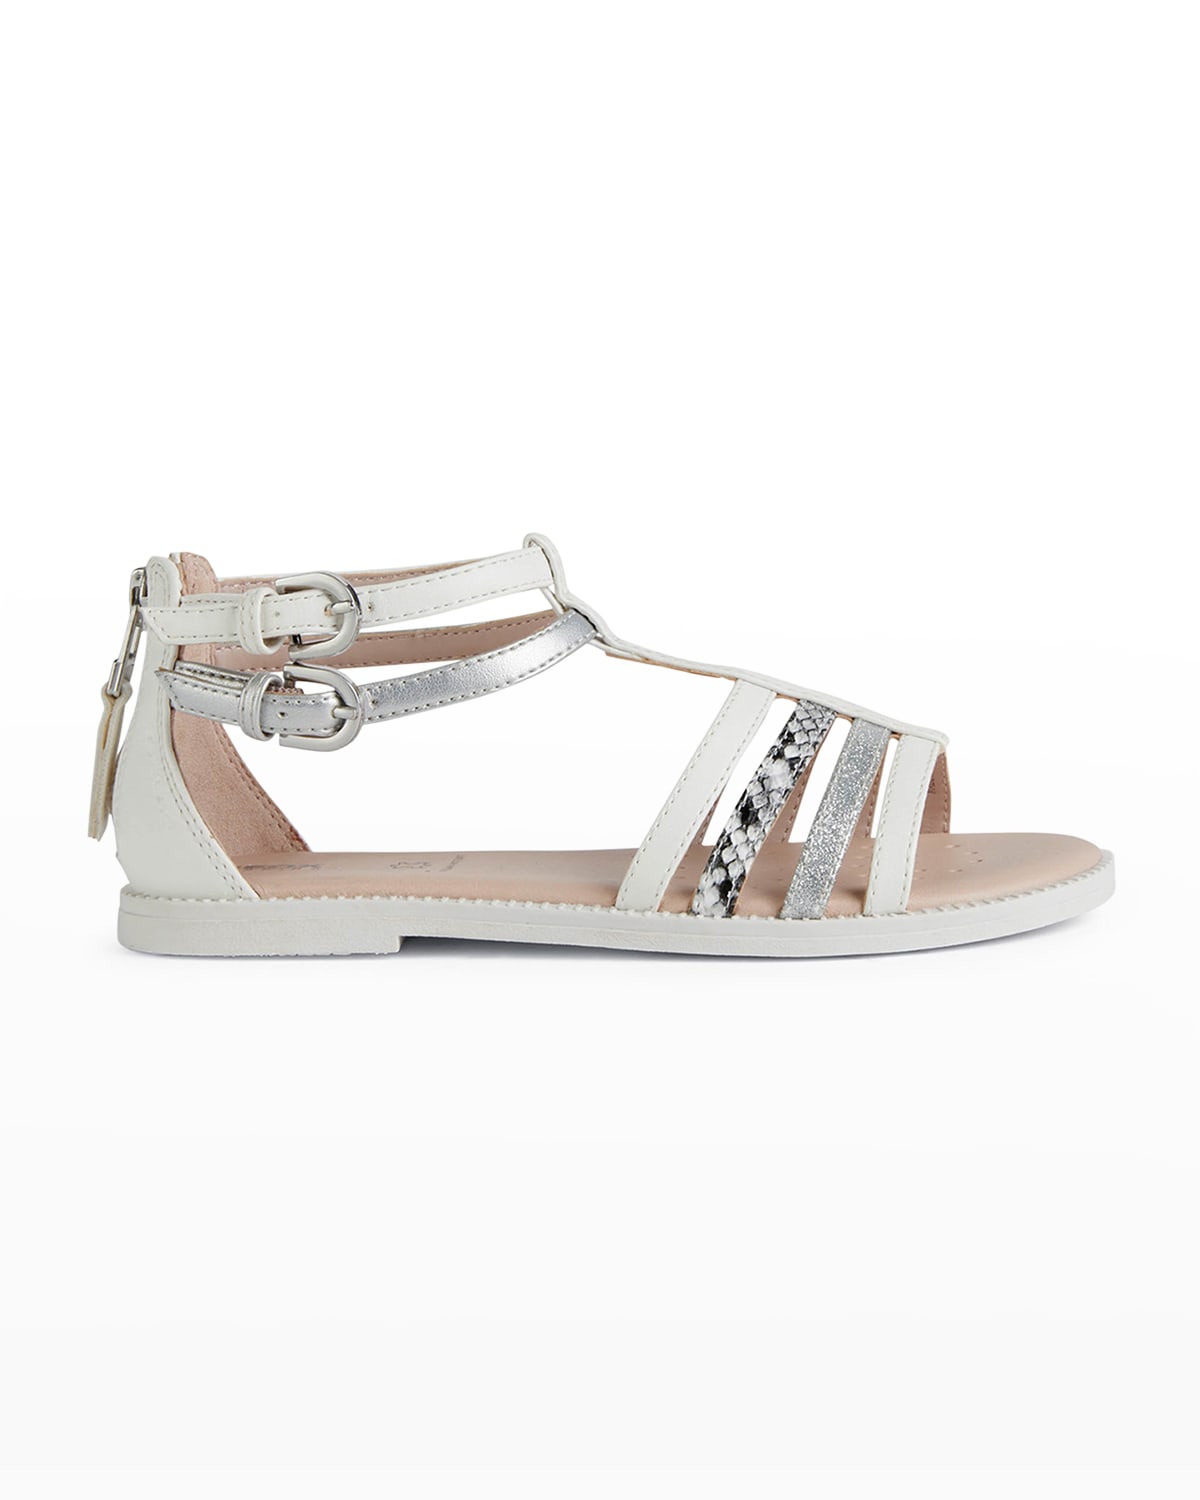 Geox Kids' Karly Sandal In White/ Silver